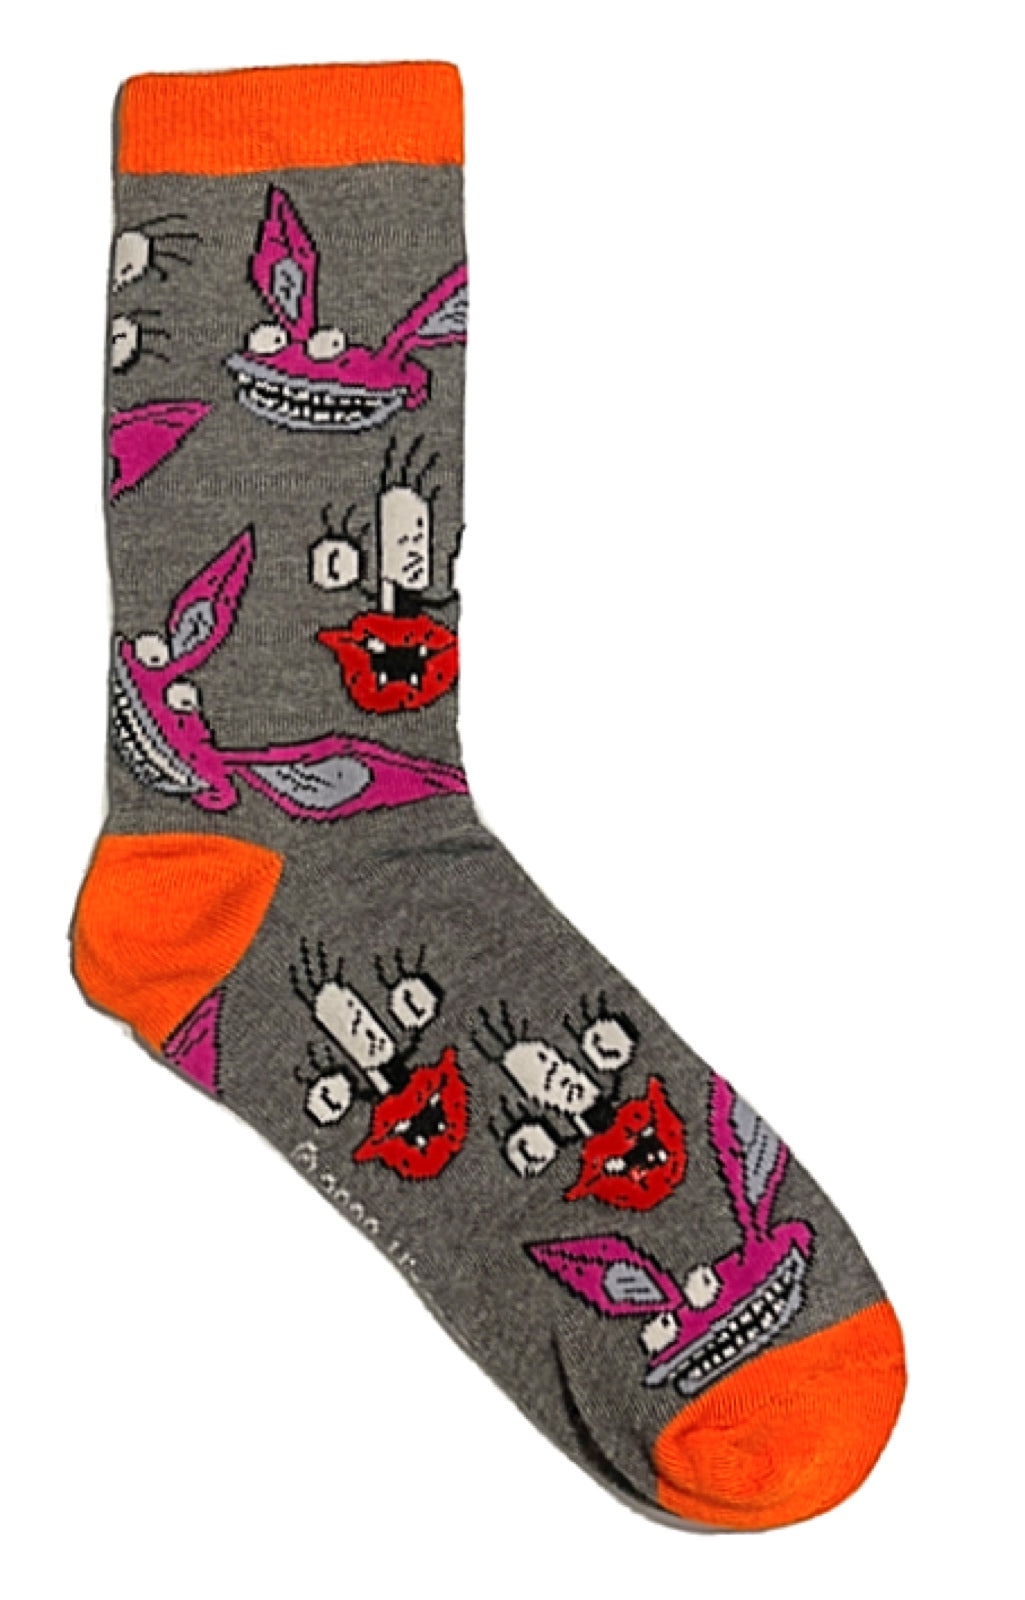 Products– Novelty Socks for Less